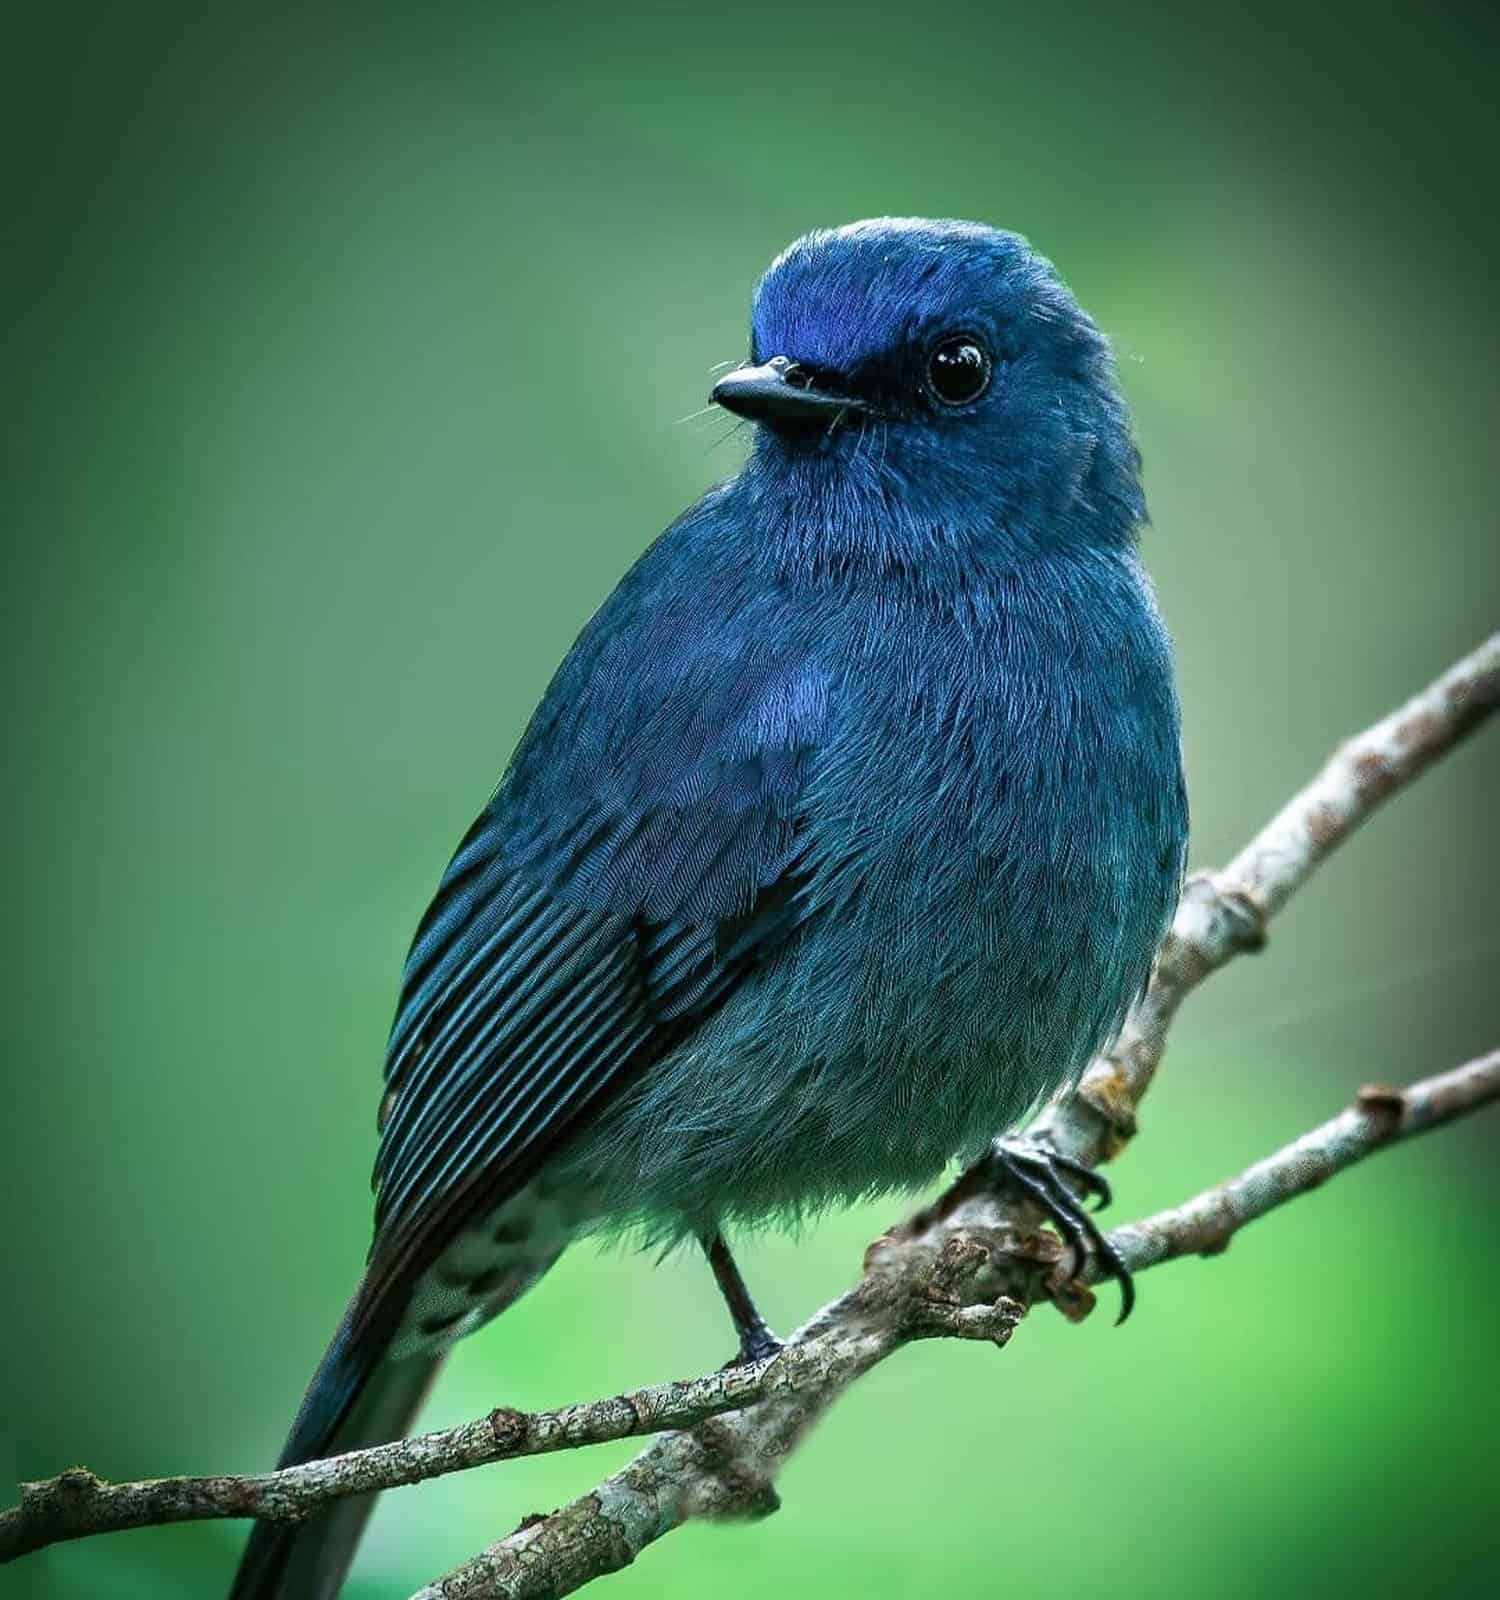 The Nilgiri flycatcher (Eumyias albicaudatus) is an Old World flycatcher with a very restricted range in the hills of southern India